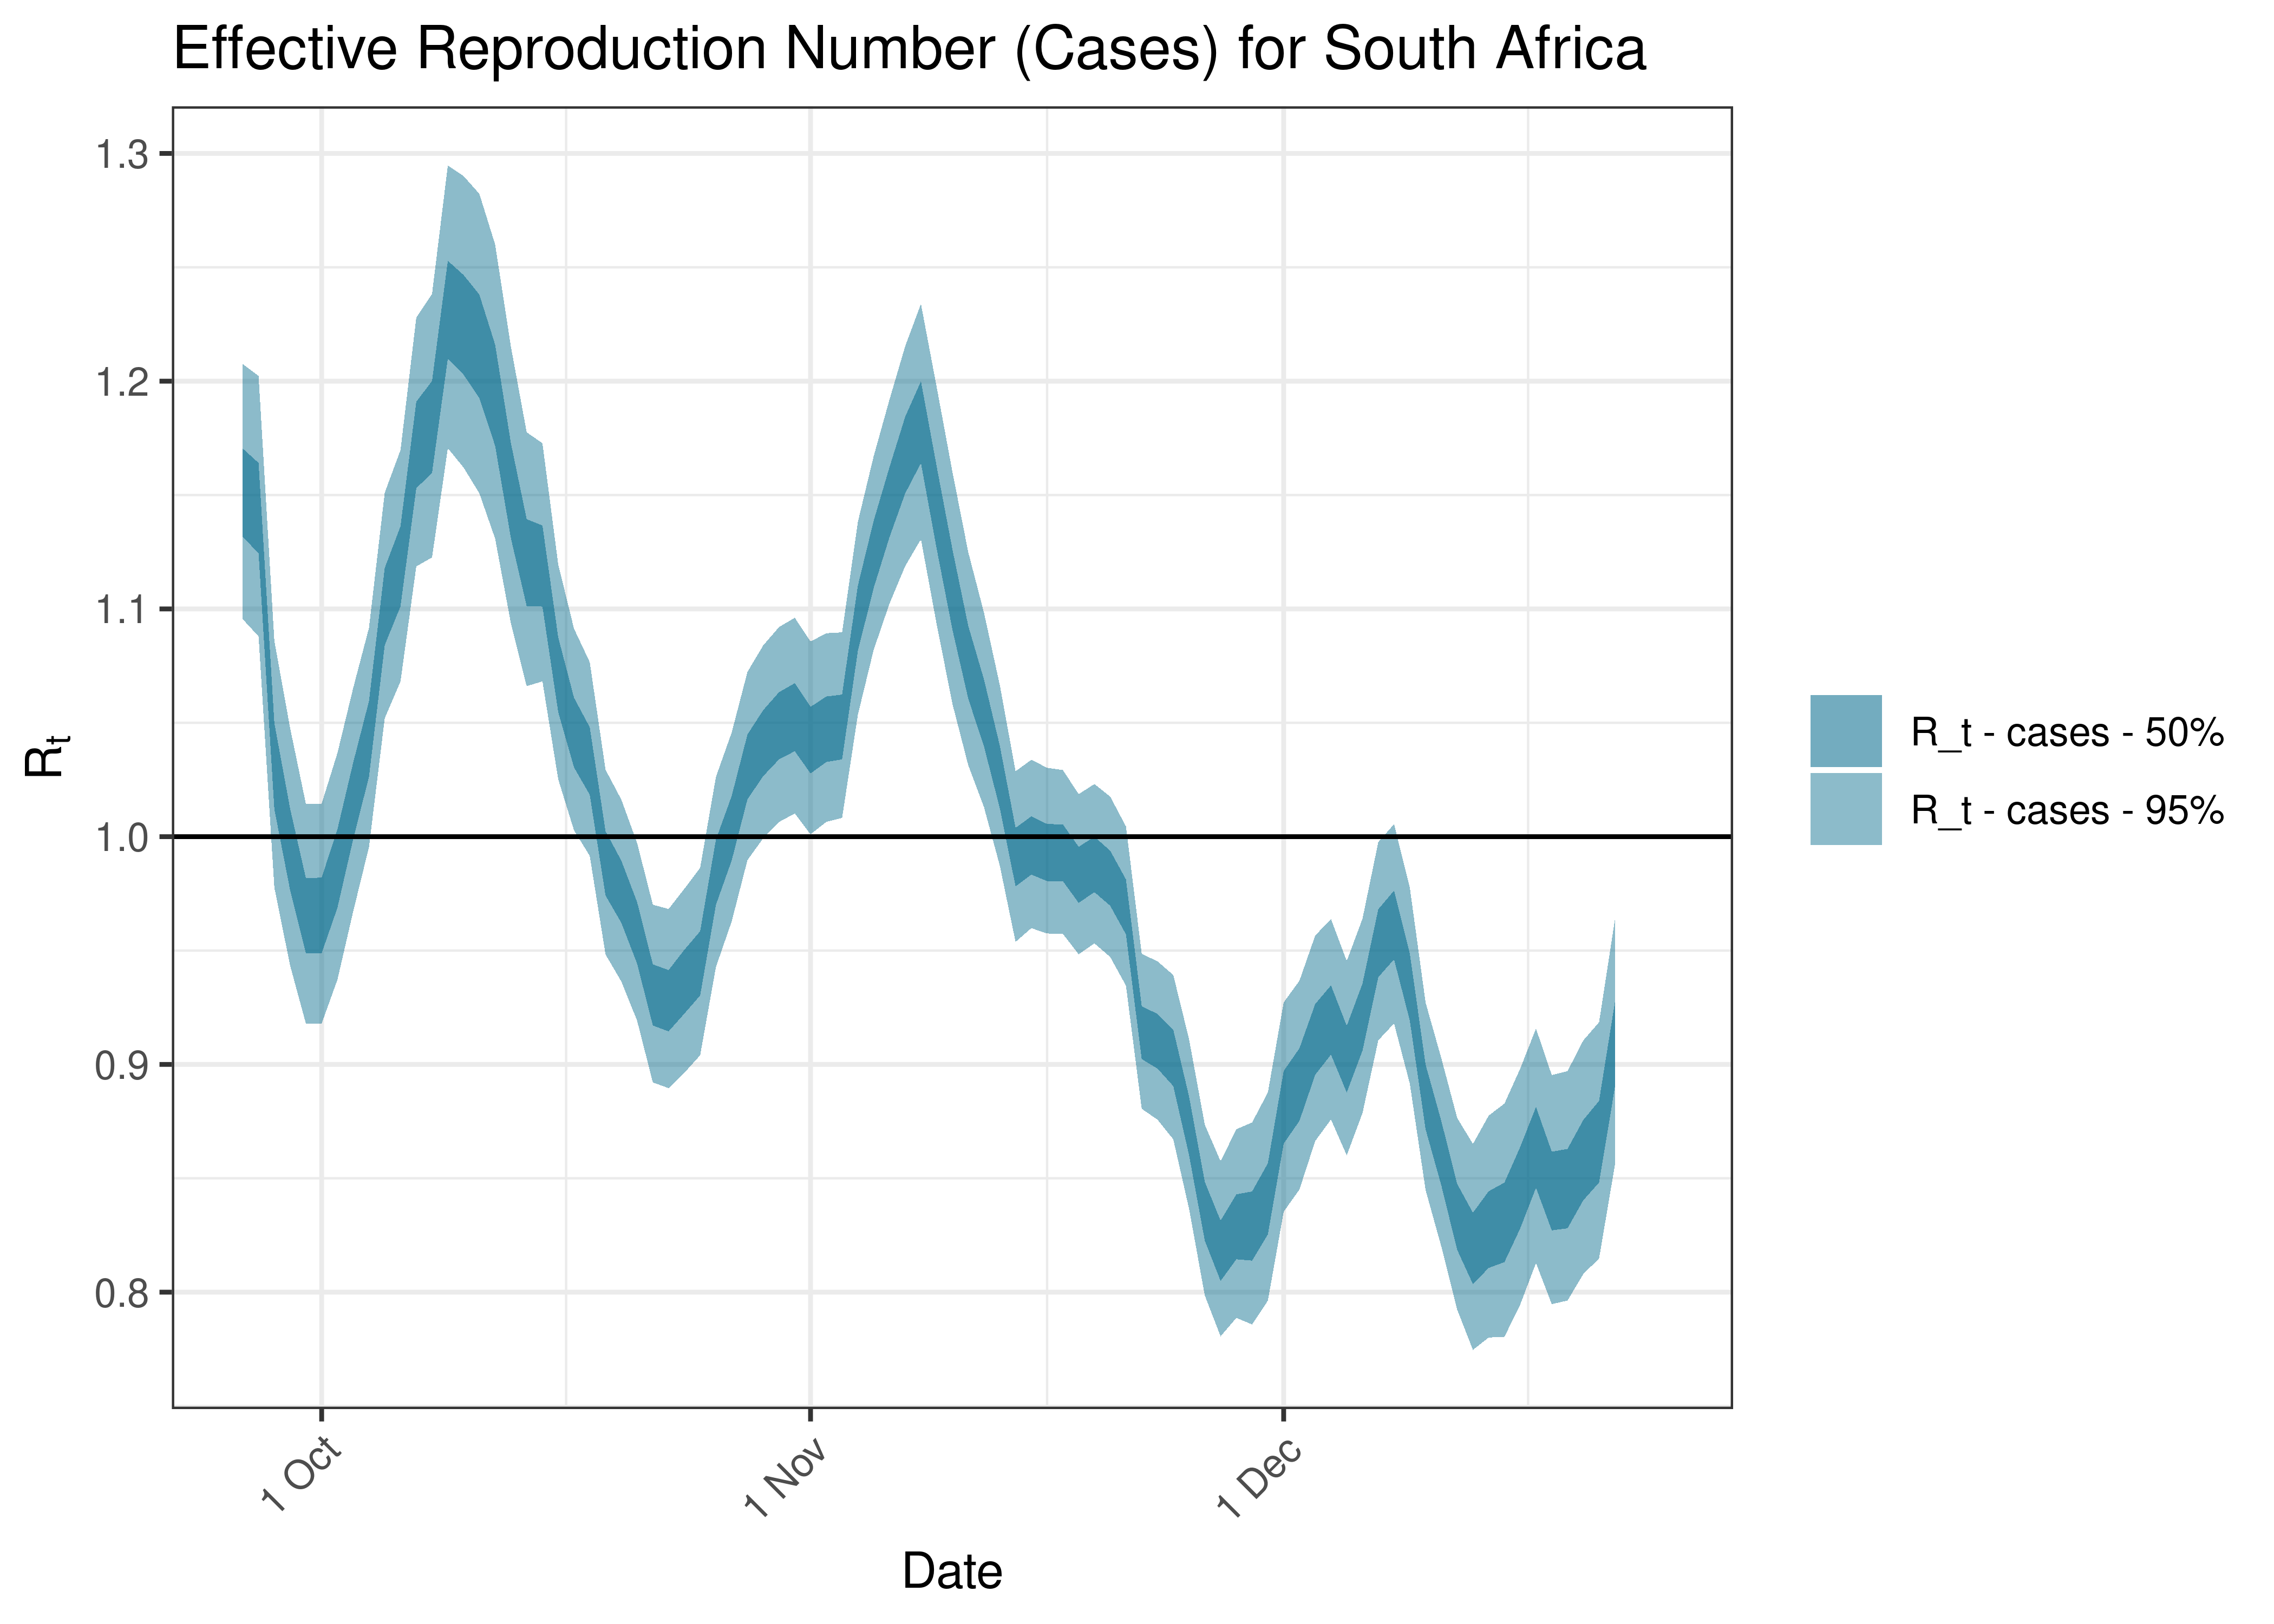 Estimated Effective Reproduction Number Based on Cases for South Africa over last 90 days